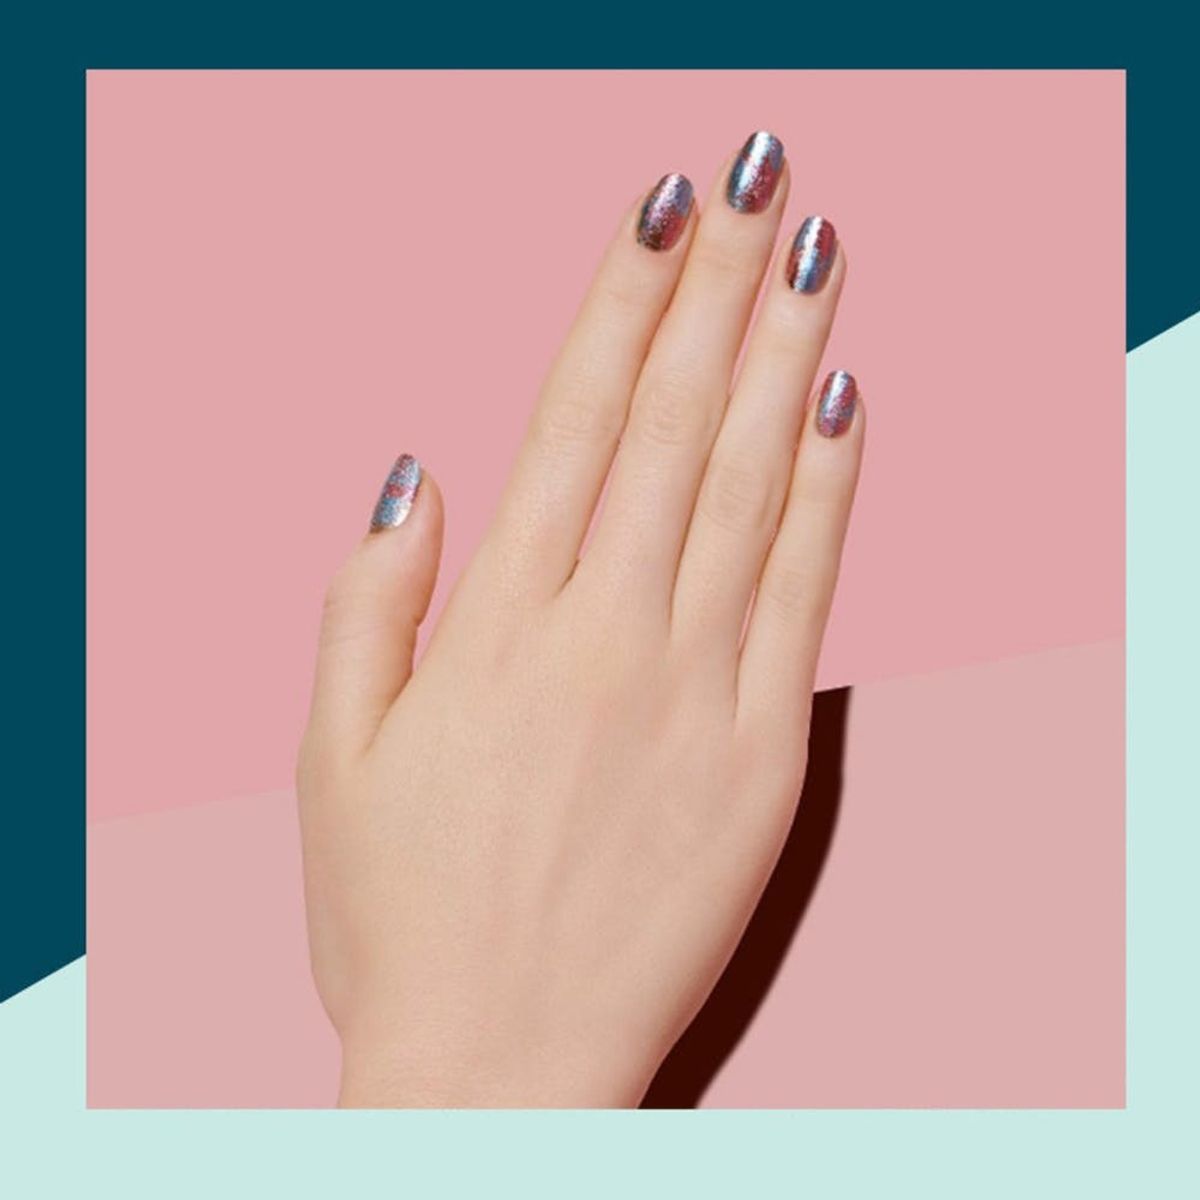 The Mosaic Nail Trend Is Officially Taking Over Our Feeds